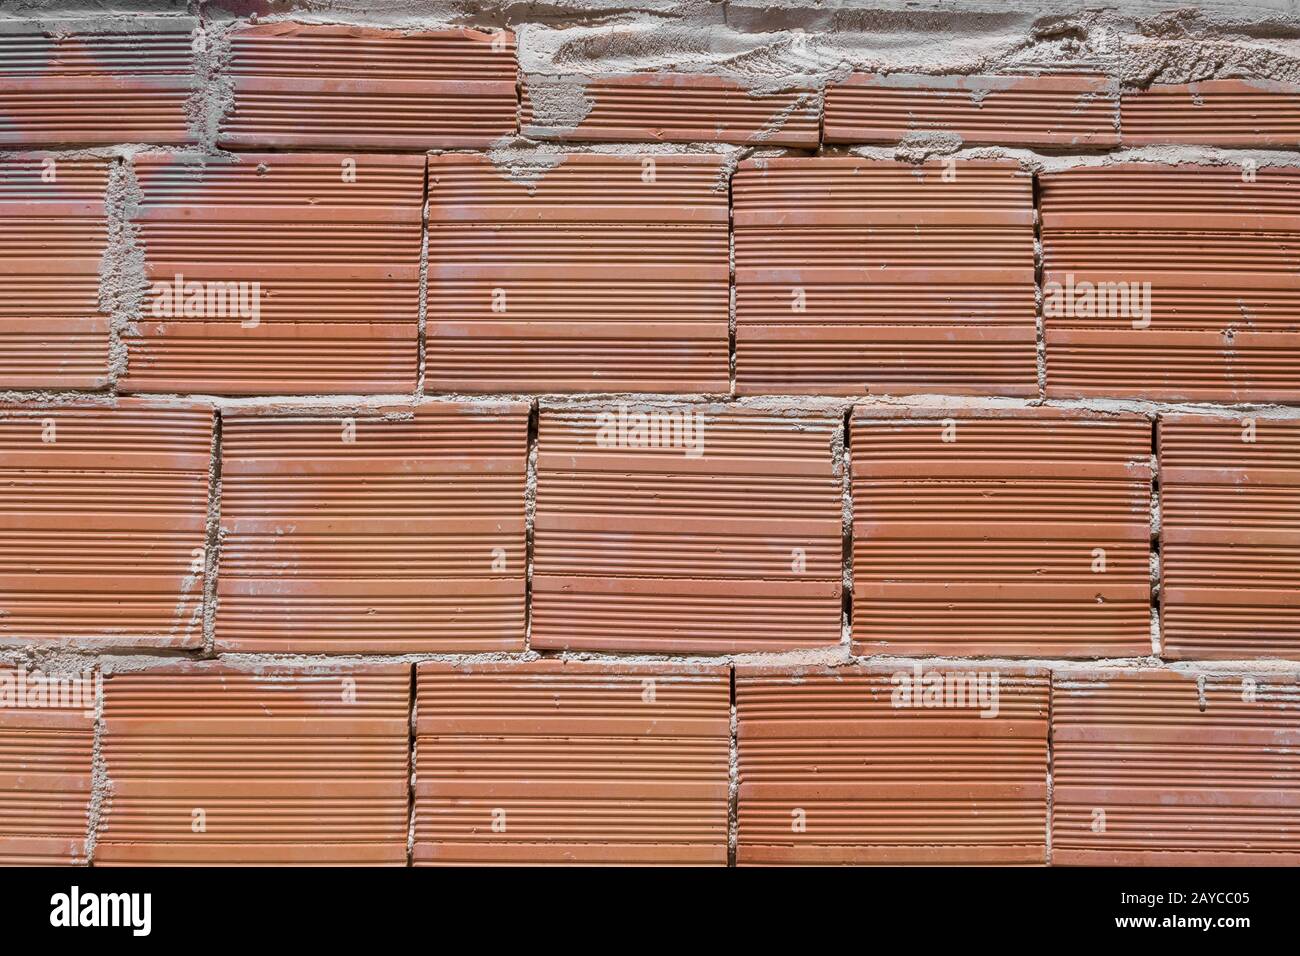 Clay Blocks High Resolution Stock Photography and Images - Alamy